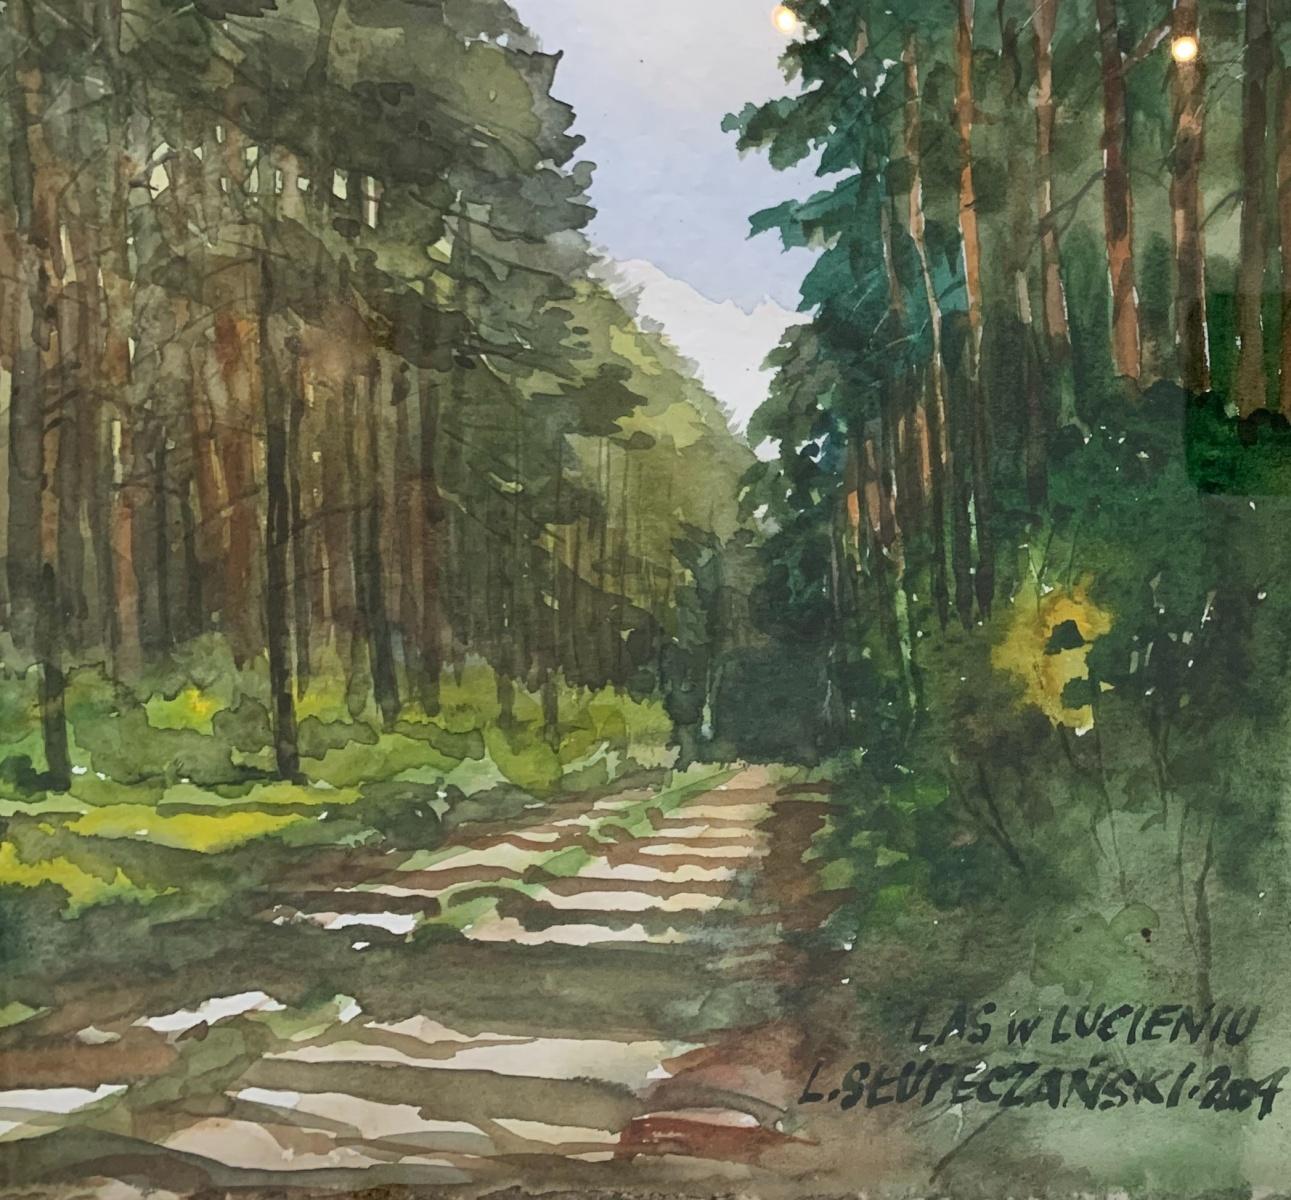 Forest in Lucien - Contemporary Watercolor Painting, Sunny landscape, Realistic  - Art by Ludomir Slupeczanski